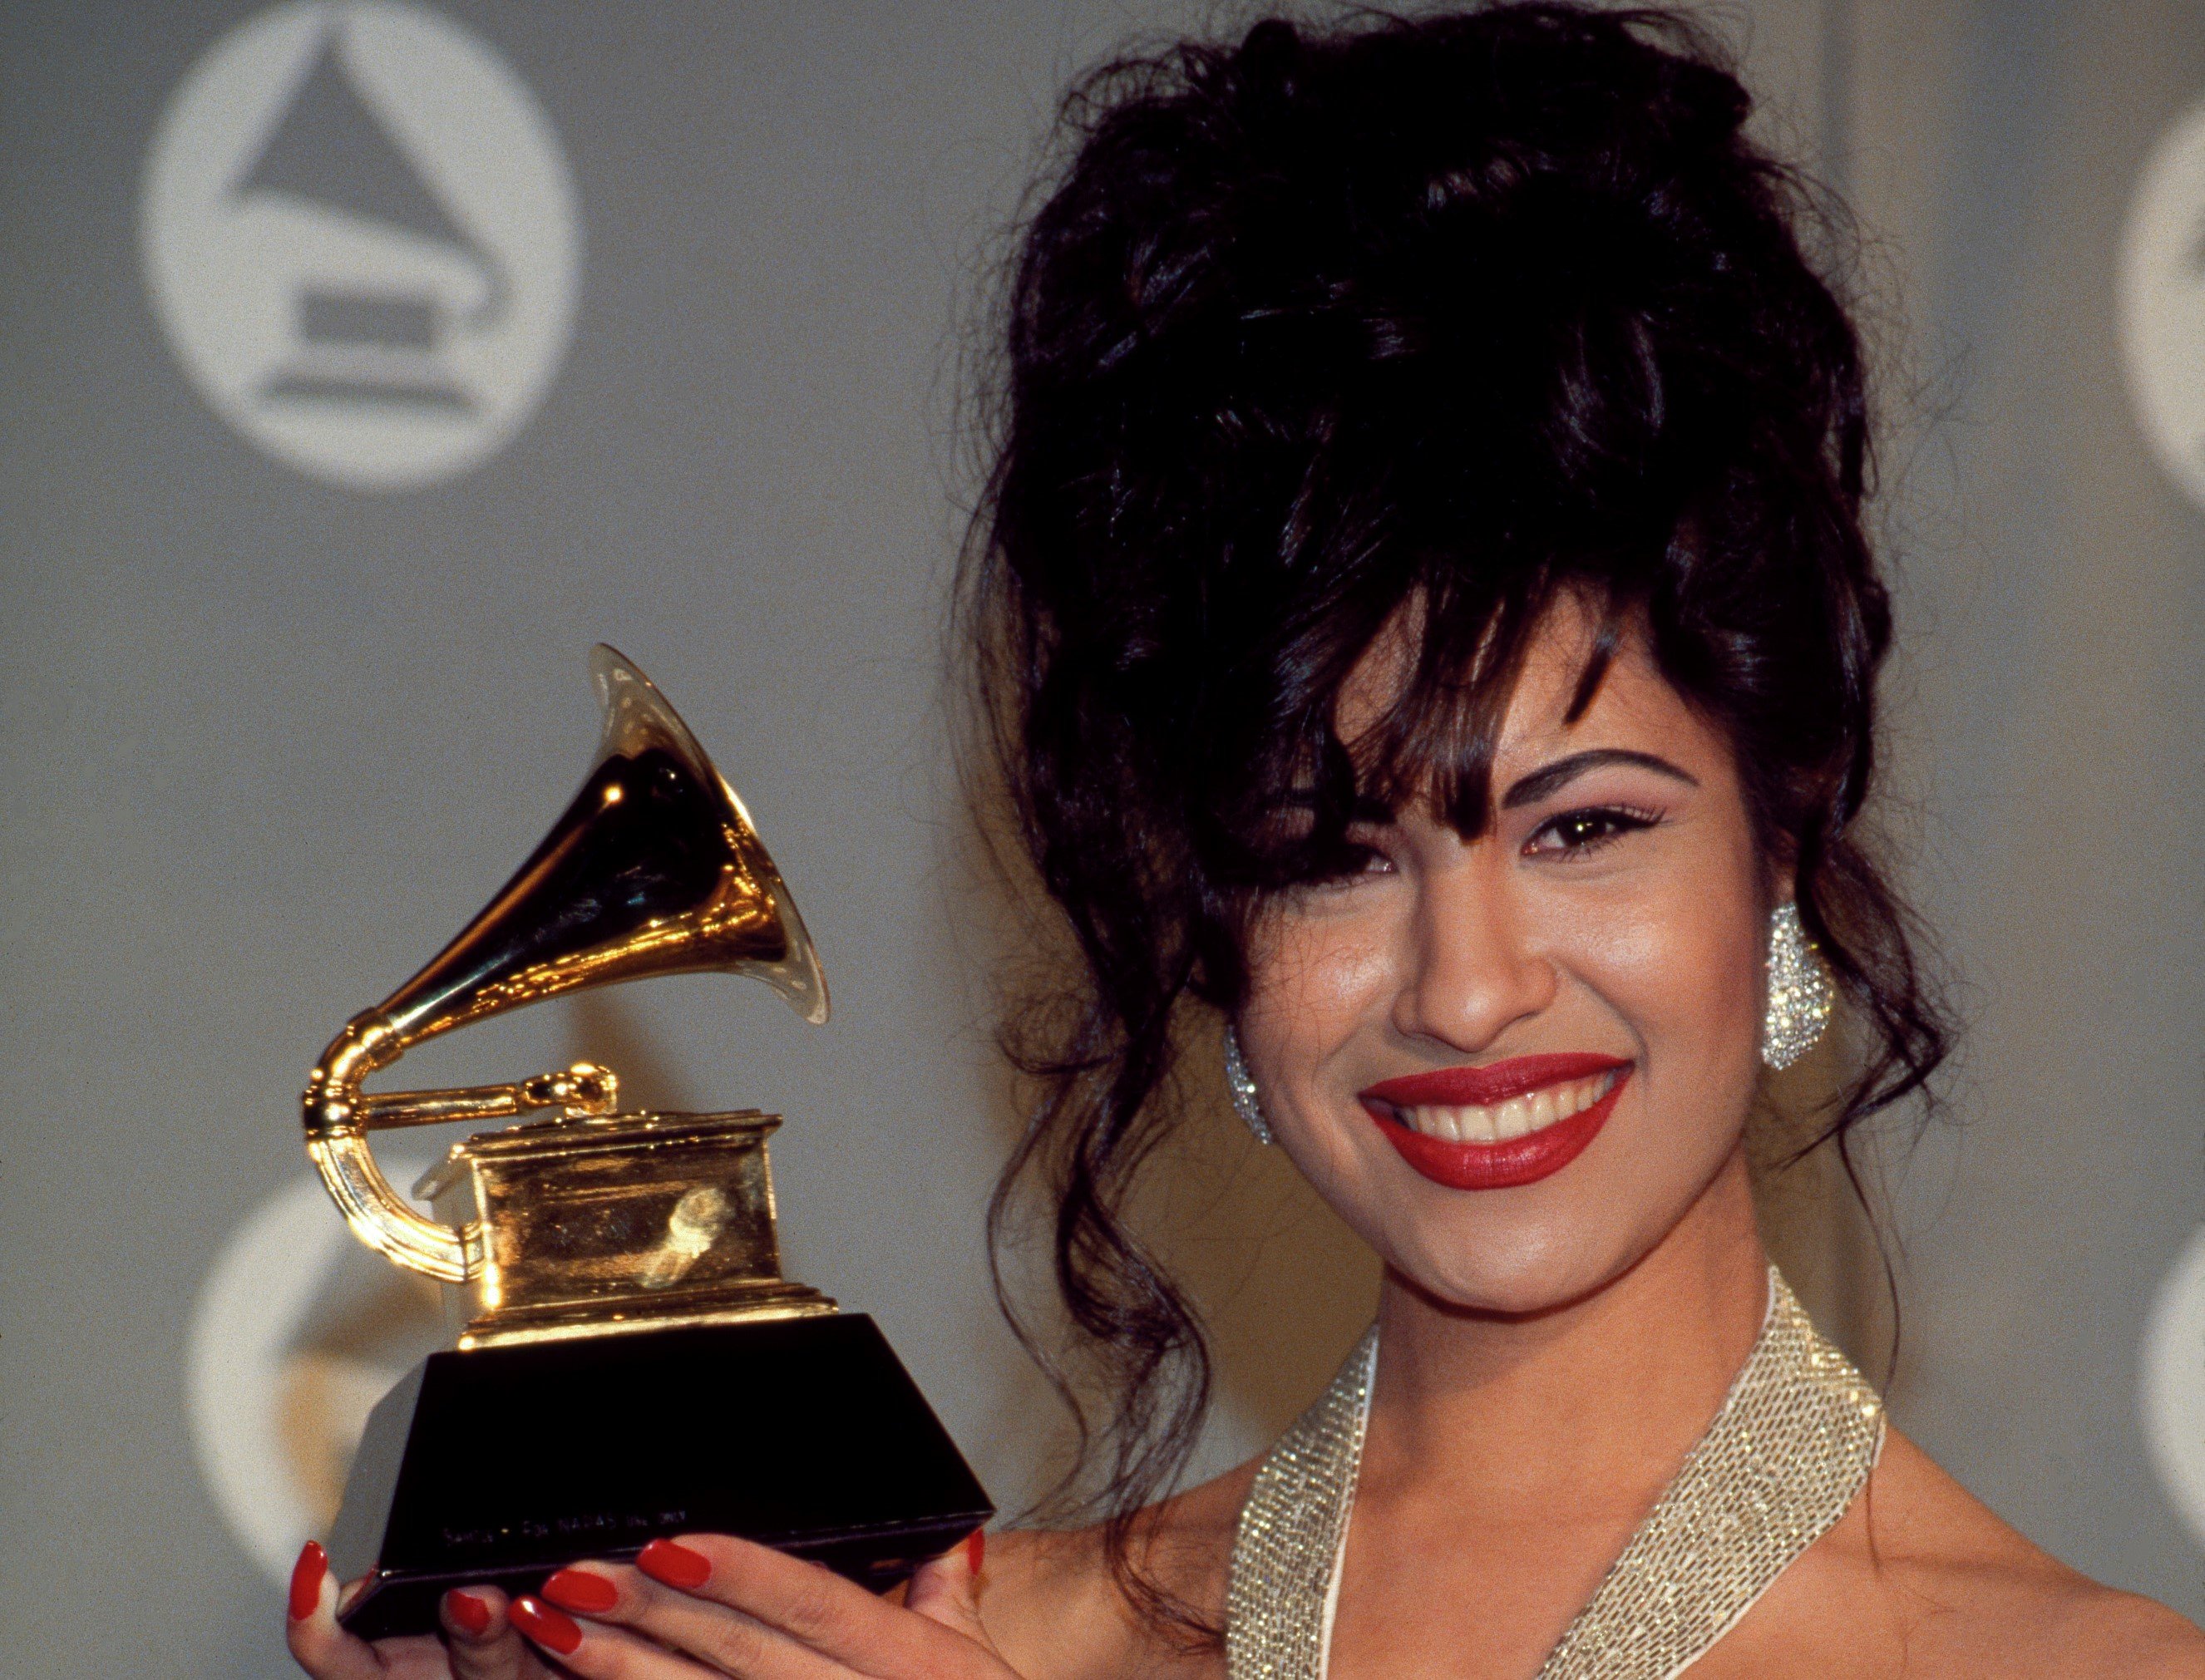 What Was Selena Quintanilla’s Religion and Did Doctors Go Against Beliefs When Trying to Save Her Life?